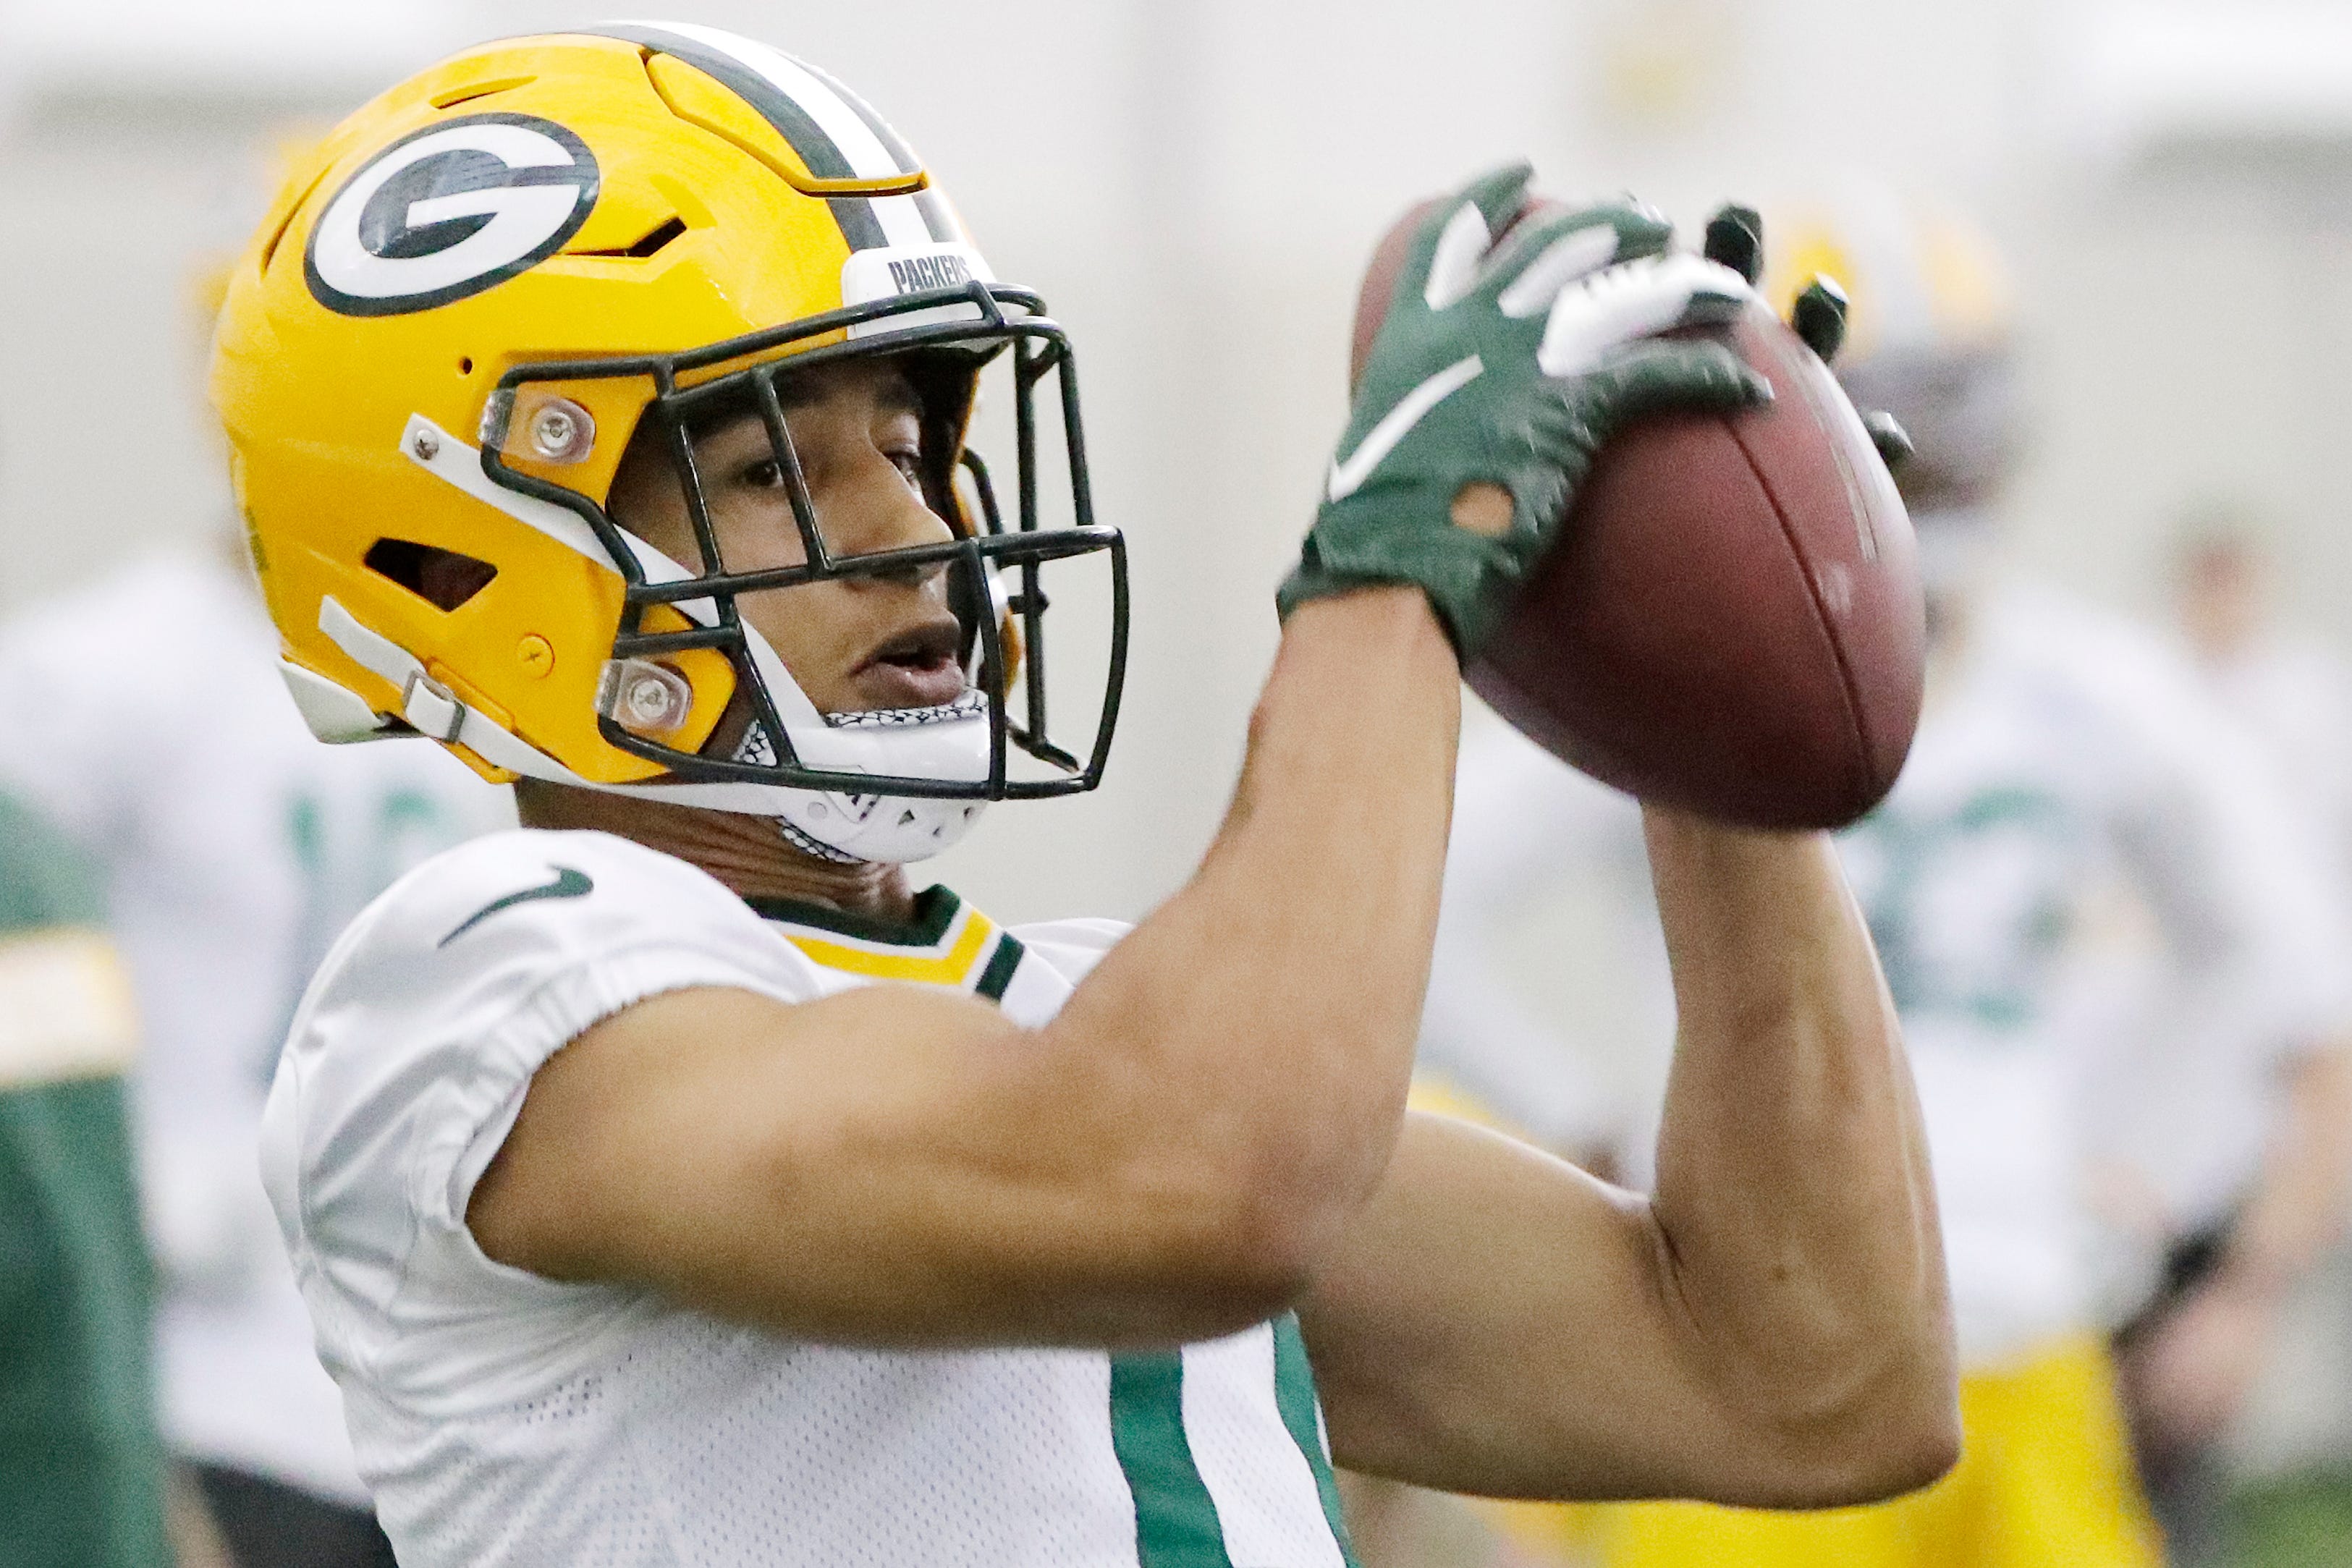 Green Bay Packers wide receiver Trevor Davis (11) catches during a team practice at the Don Hutson Center on Wednesday, April 24, 2019 in Ashwaubenon, Wis.